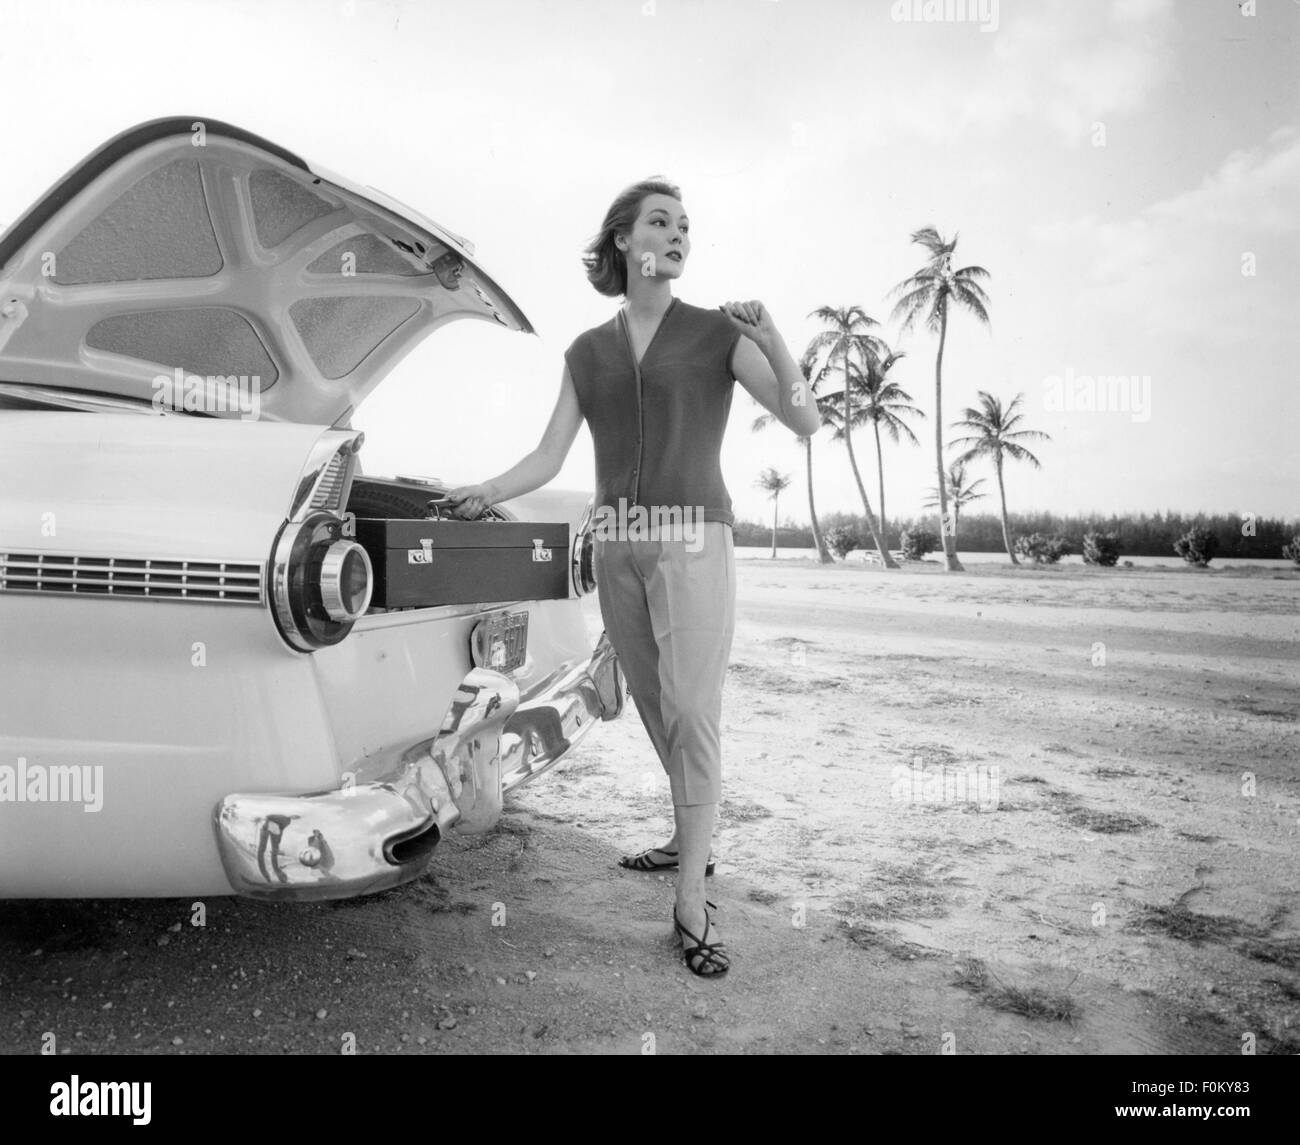 https://c8.alamy.com/comp/F0KY83/fashion-1950s-capri-pants-woman-in-fashionable-leisure-wear-with-trousers-F0KY83.jpg